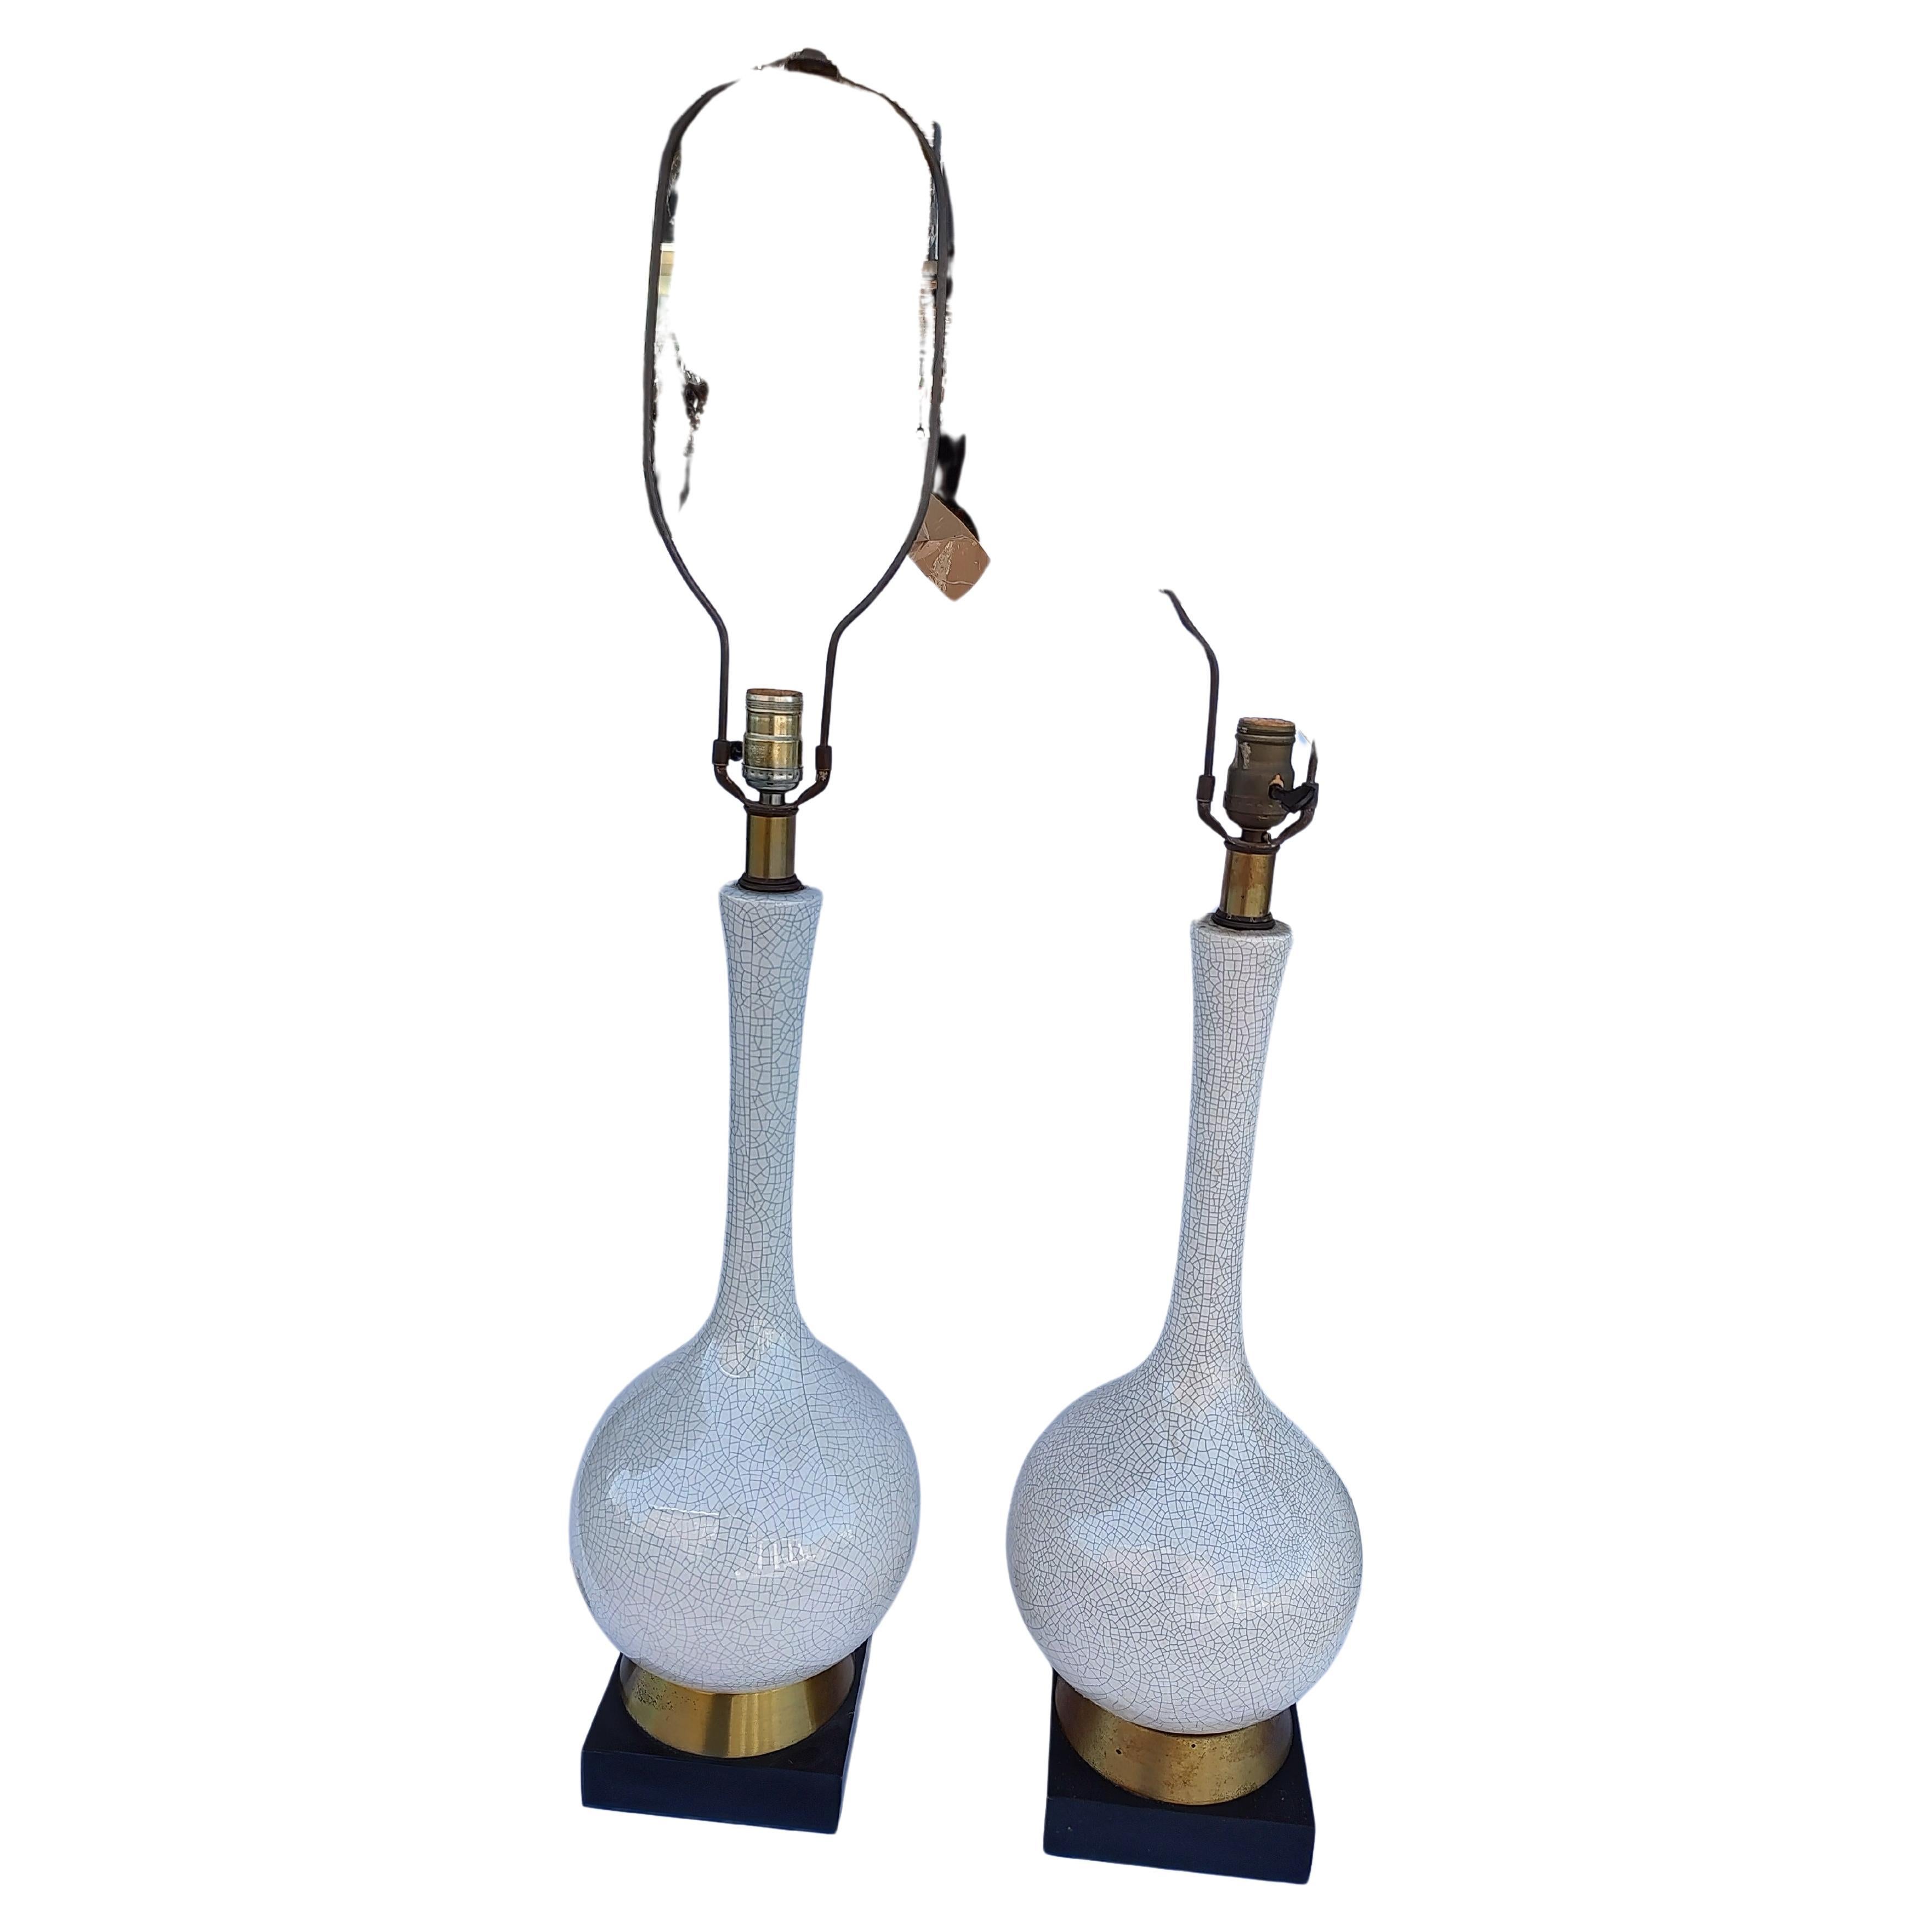 Simple and elegant pair of Mid Century Modern crackle glaze lamps. In excellent vintage condition with minimal wear. Original wiring is intact and in fine condition. Can be parcel posted.